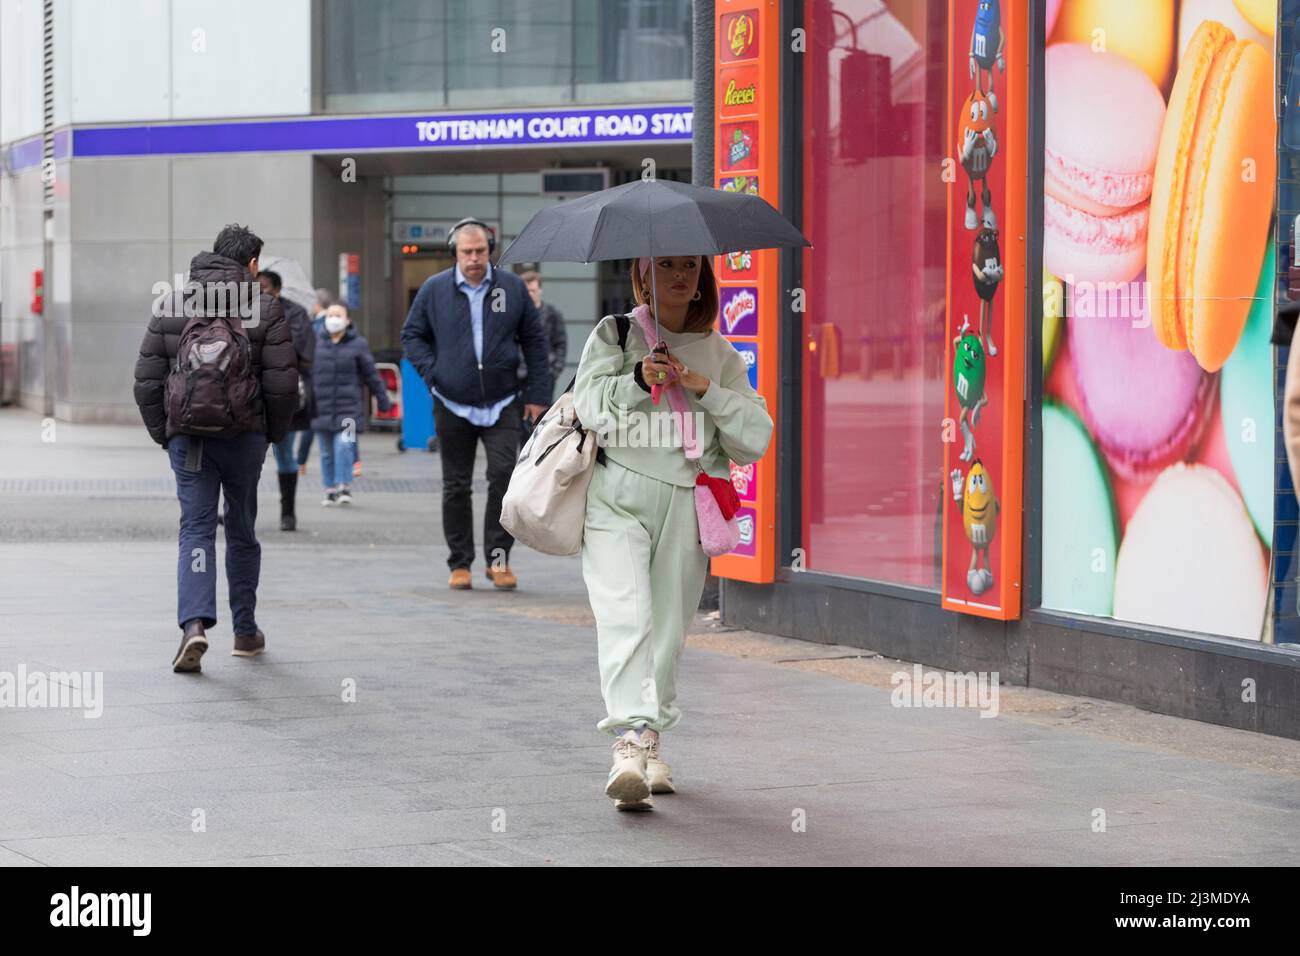 Weather is seen to be relatively dry this morning in London with occasional drizzles as morning commuters pass by Tottenham Court Road and Oxford Circ Stock Photo